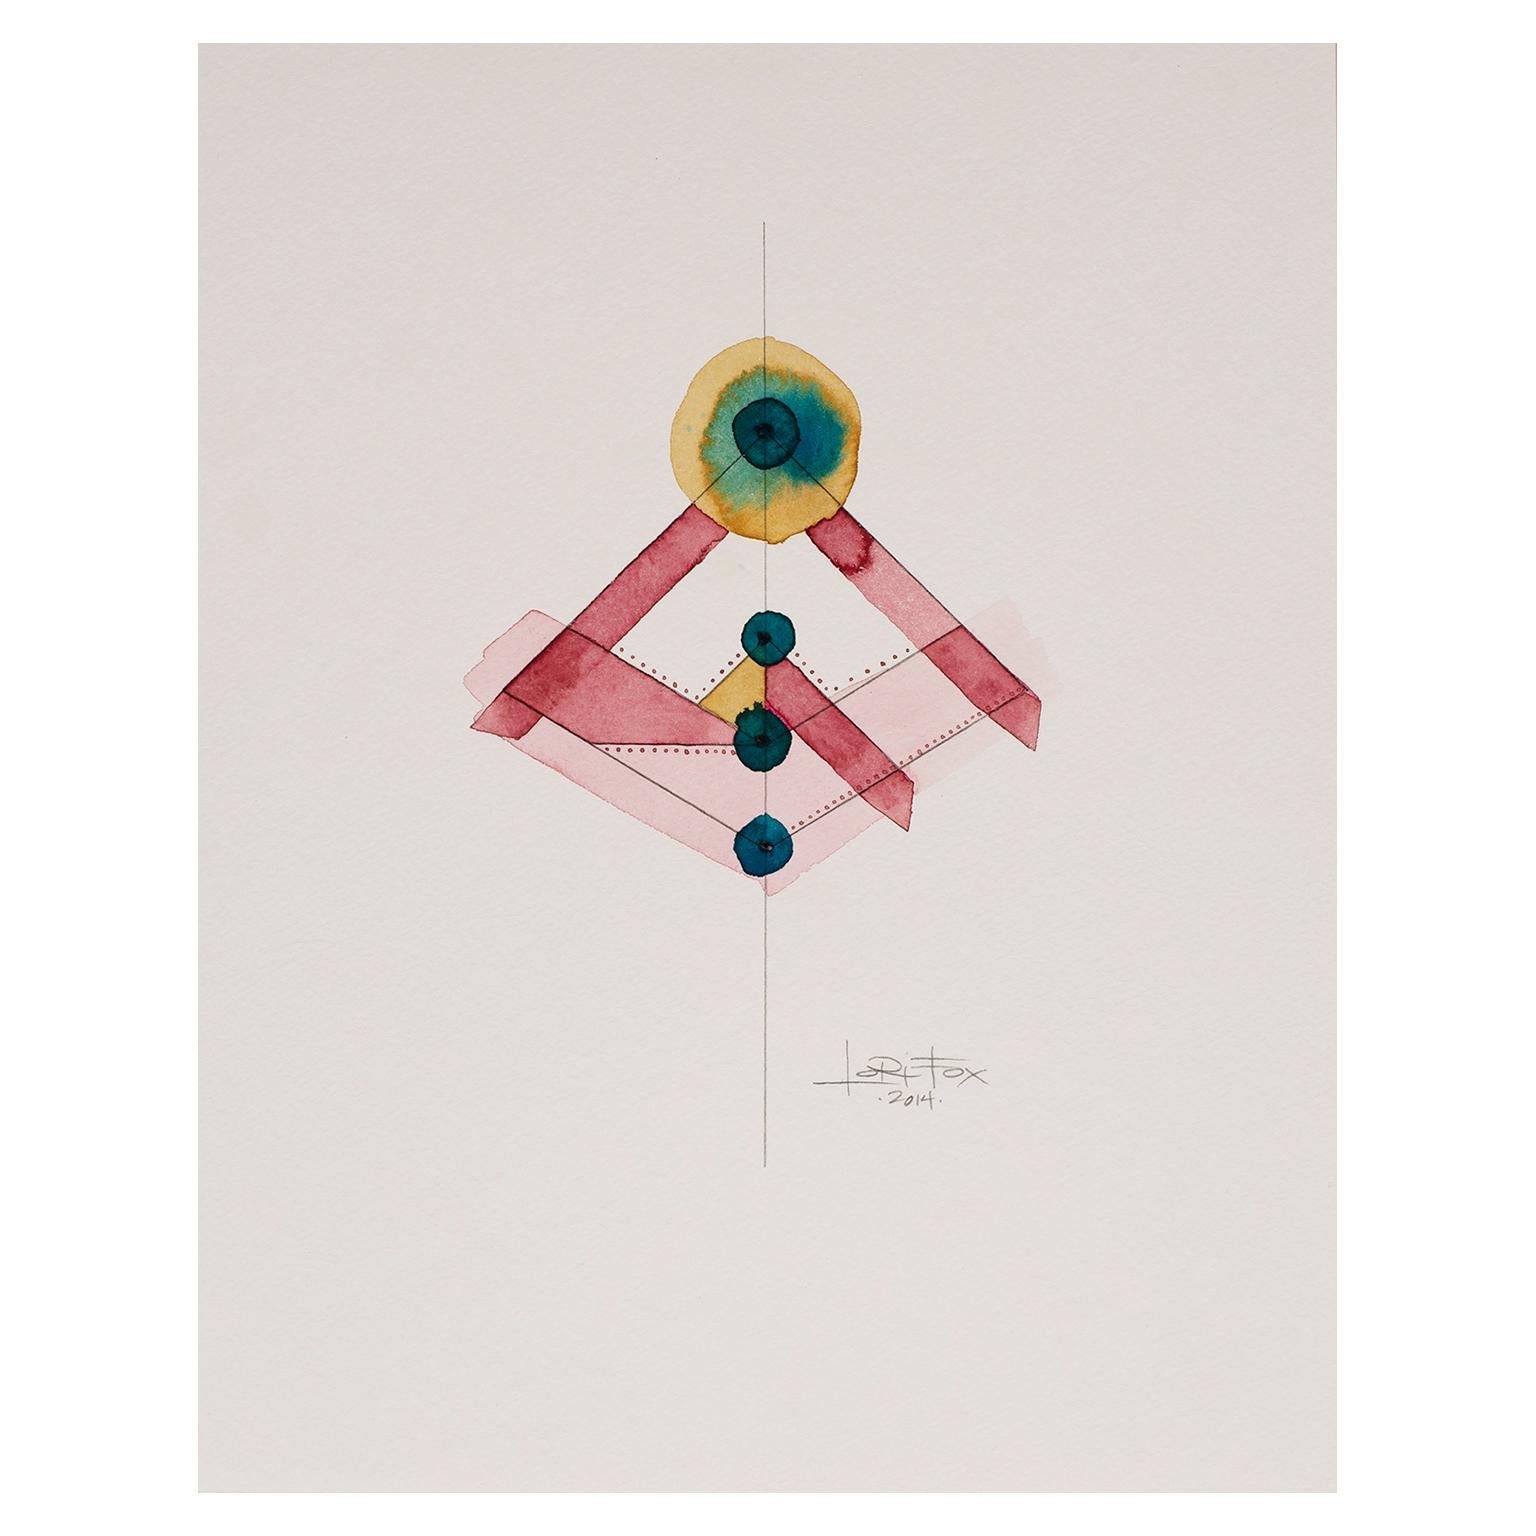 Totem 3.002 by Lori Fox. Red, Pink, Blue, Yellow gold, Teal watercolor on paper For Sale 1